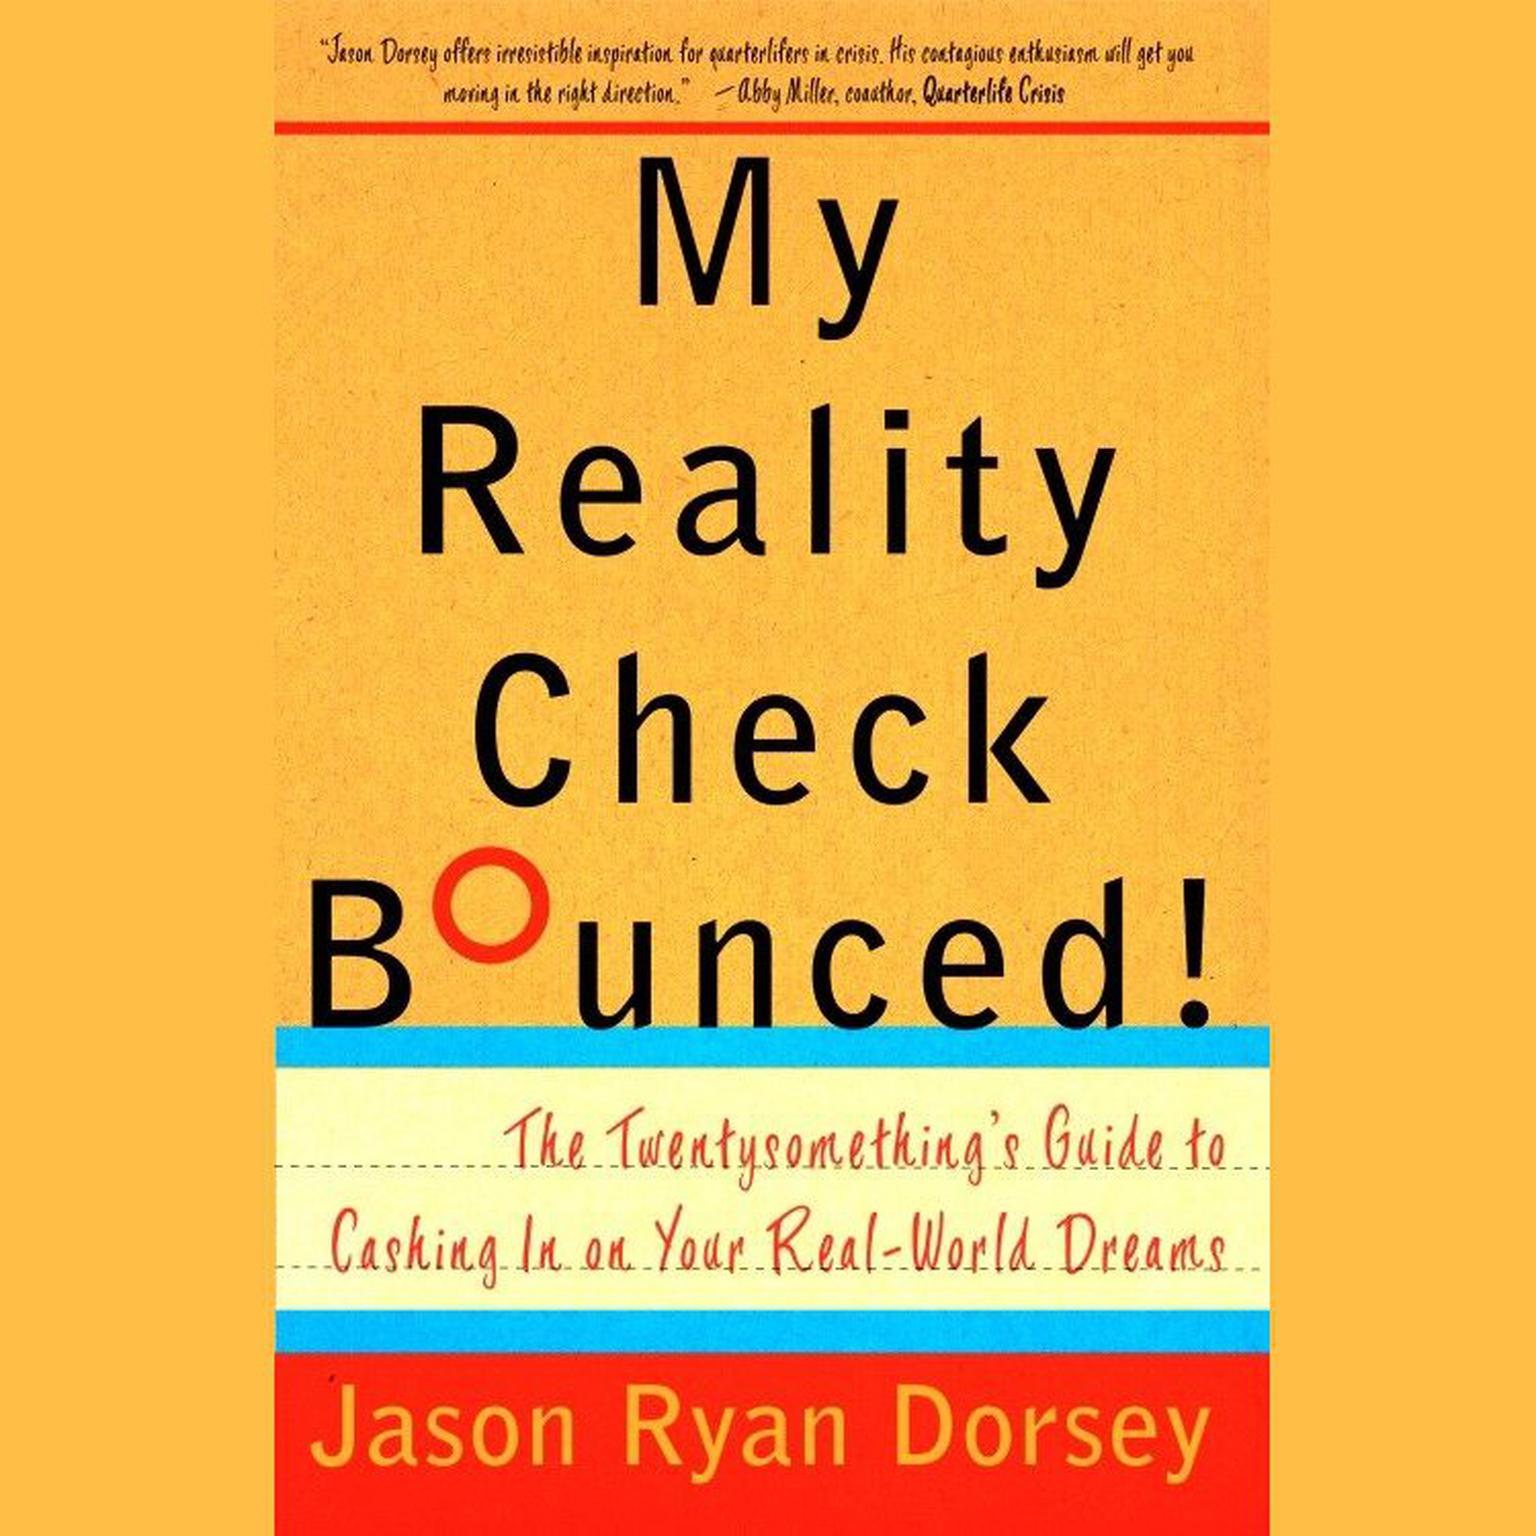 My Reality Check Bounced!: The Gen-Y Guide to Cashing In On Your Real-World Dreams Audiobook, by Jason R. Dorsey